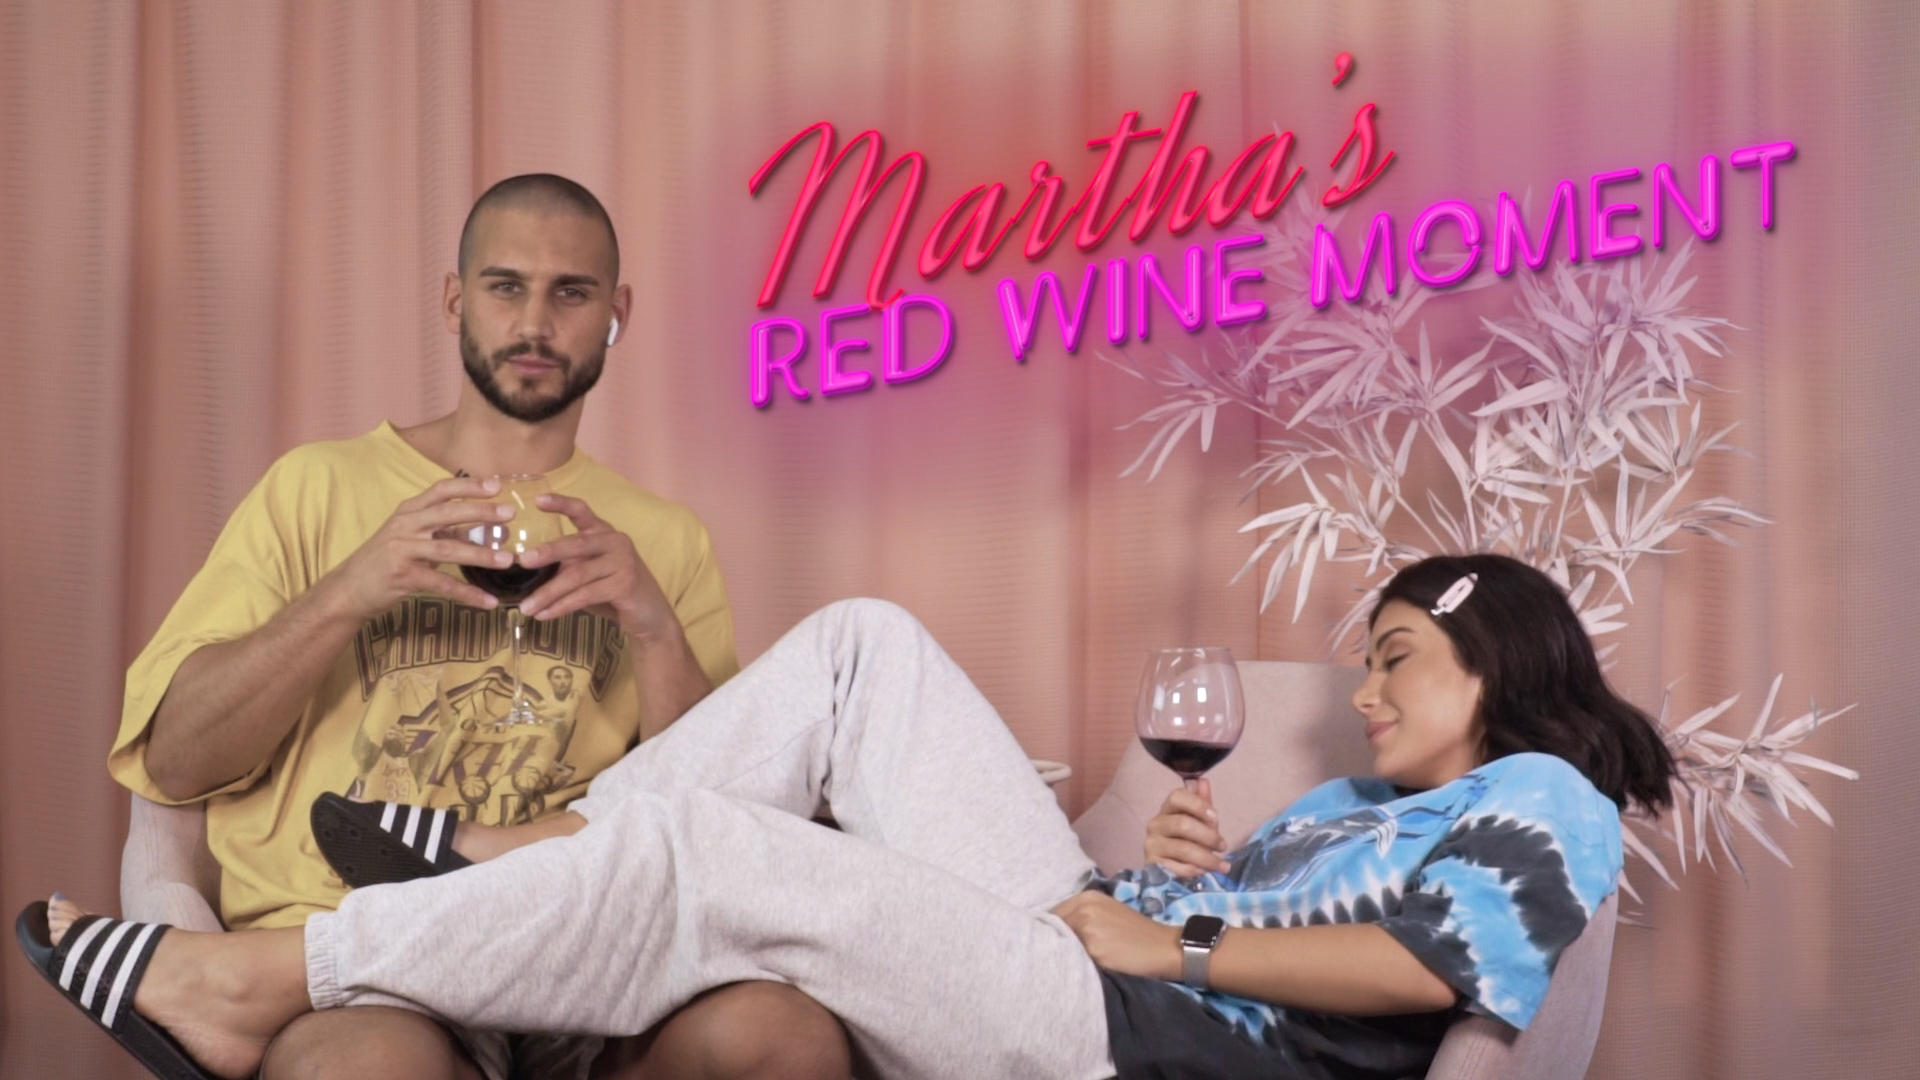 Martha's Red Wine Moment #7 from the Girls' and Boys' Nights